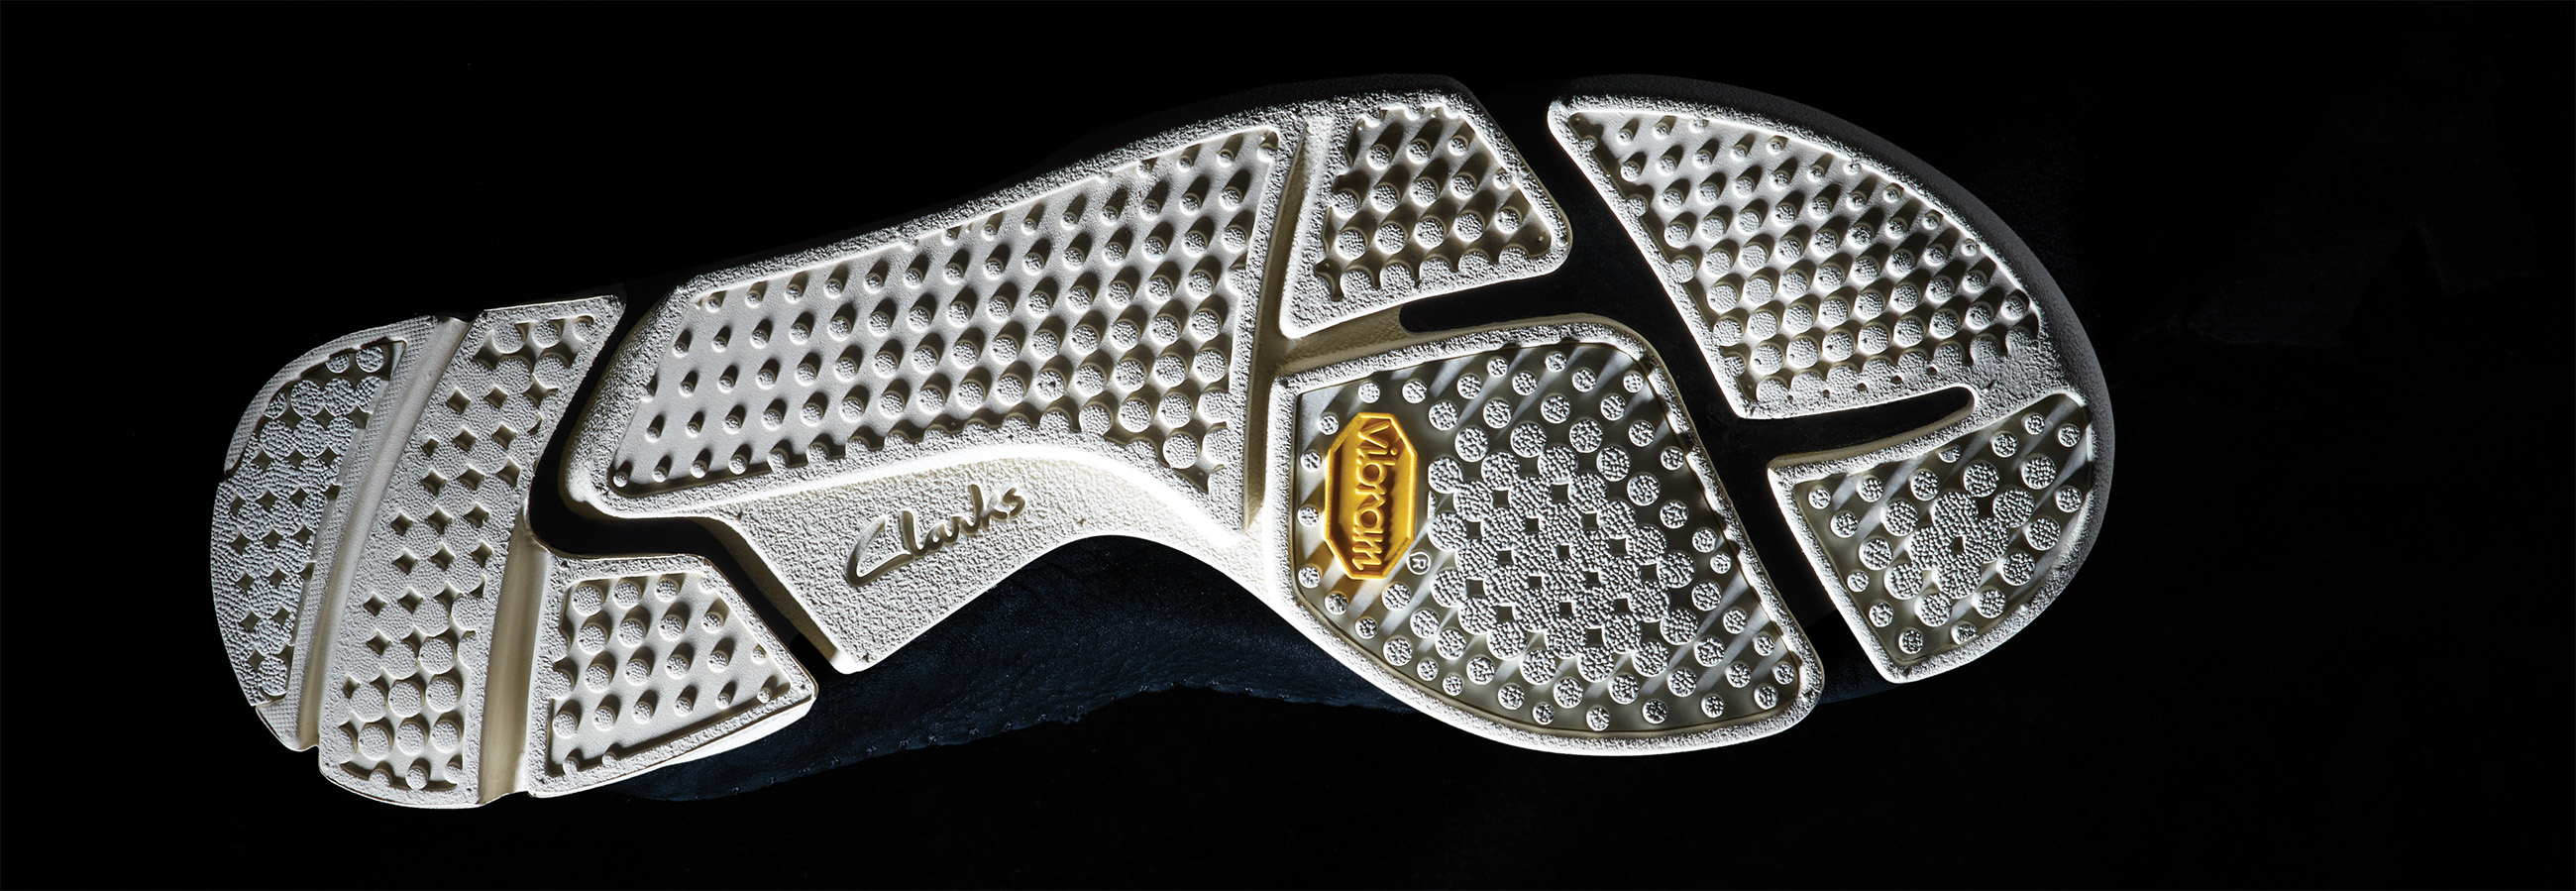 Clarks Introduces Trigenic, a New Innovation Build with the Same Principles Iconic Desert Boot